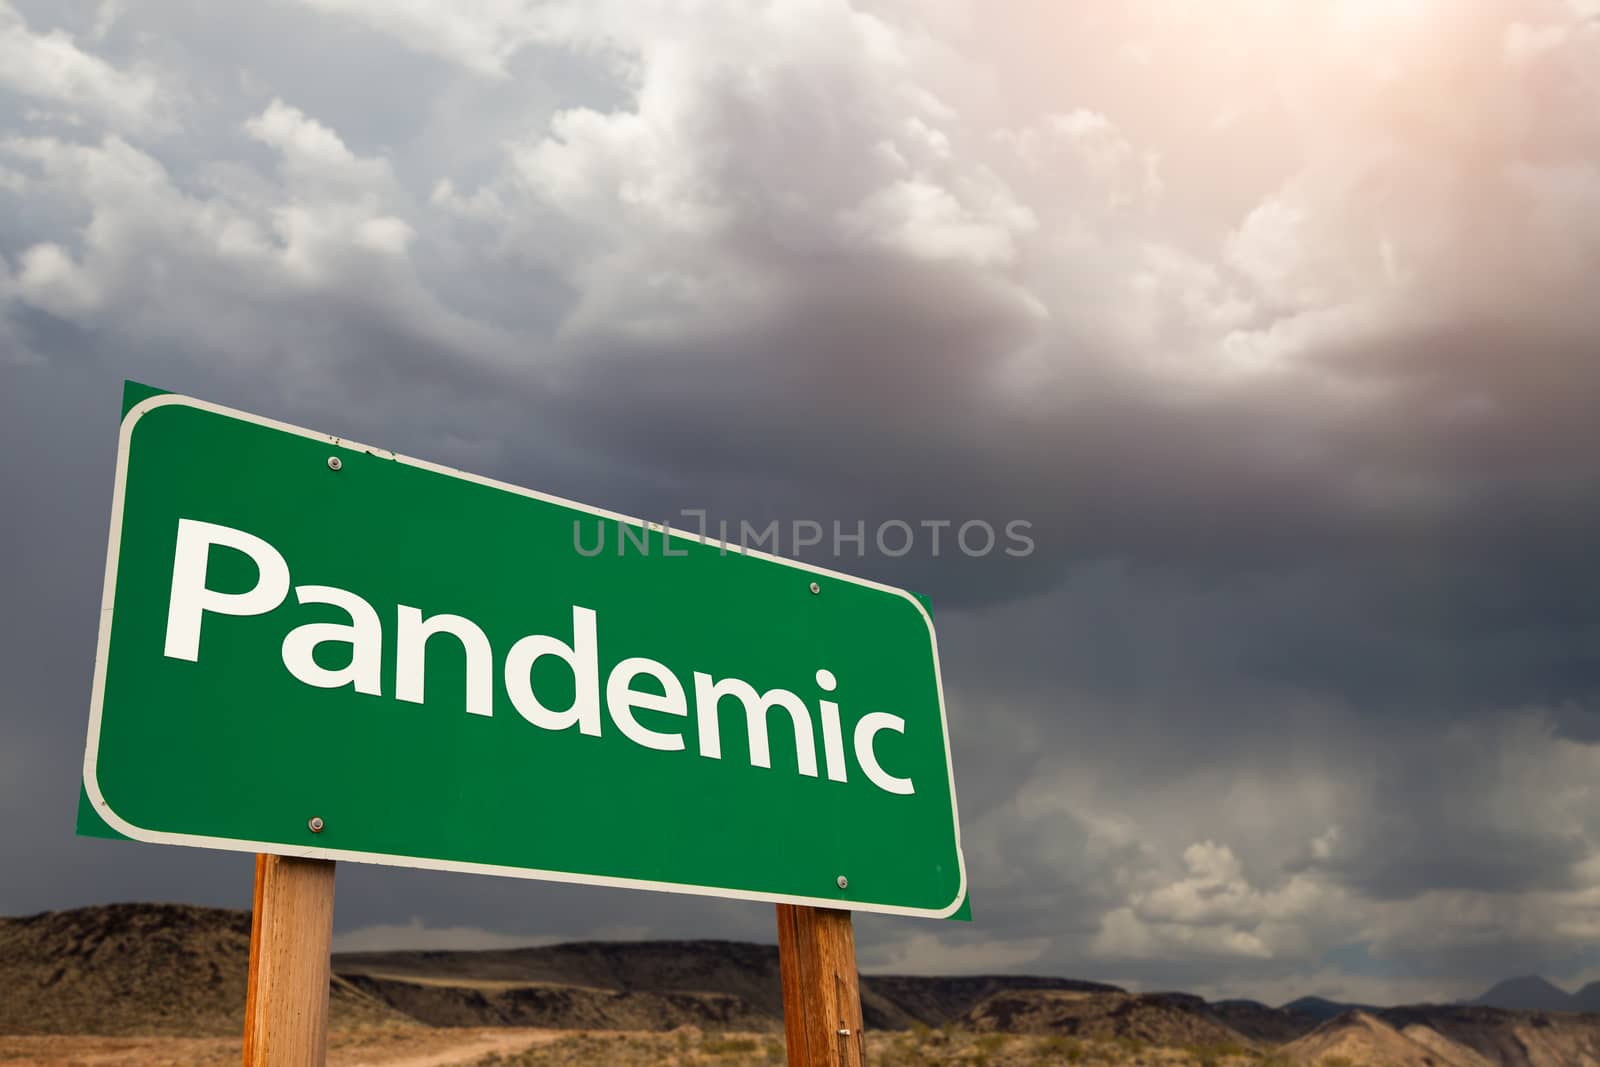 Pandemic Green Road Sign Against Ominous Stormy Cloudy Sky.